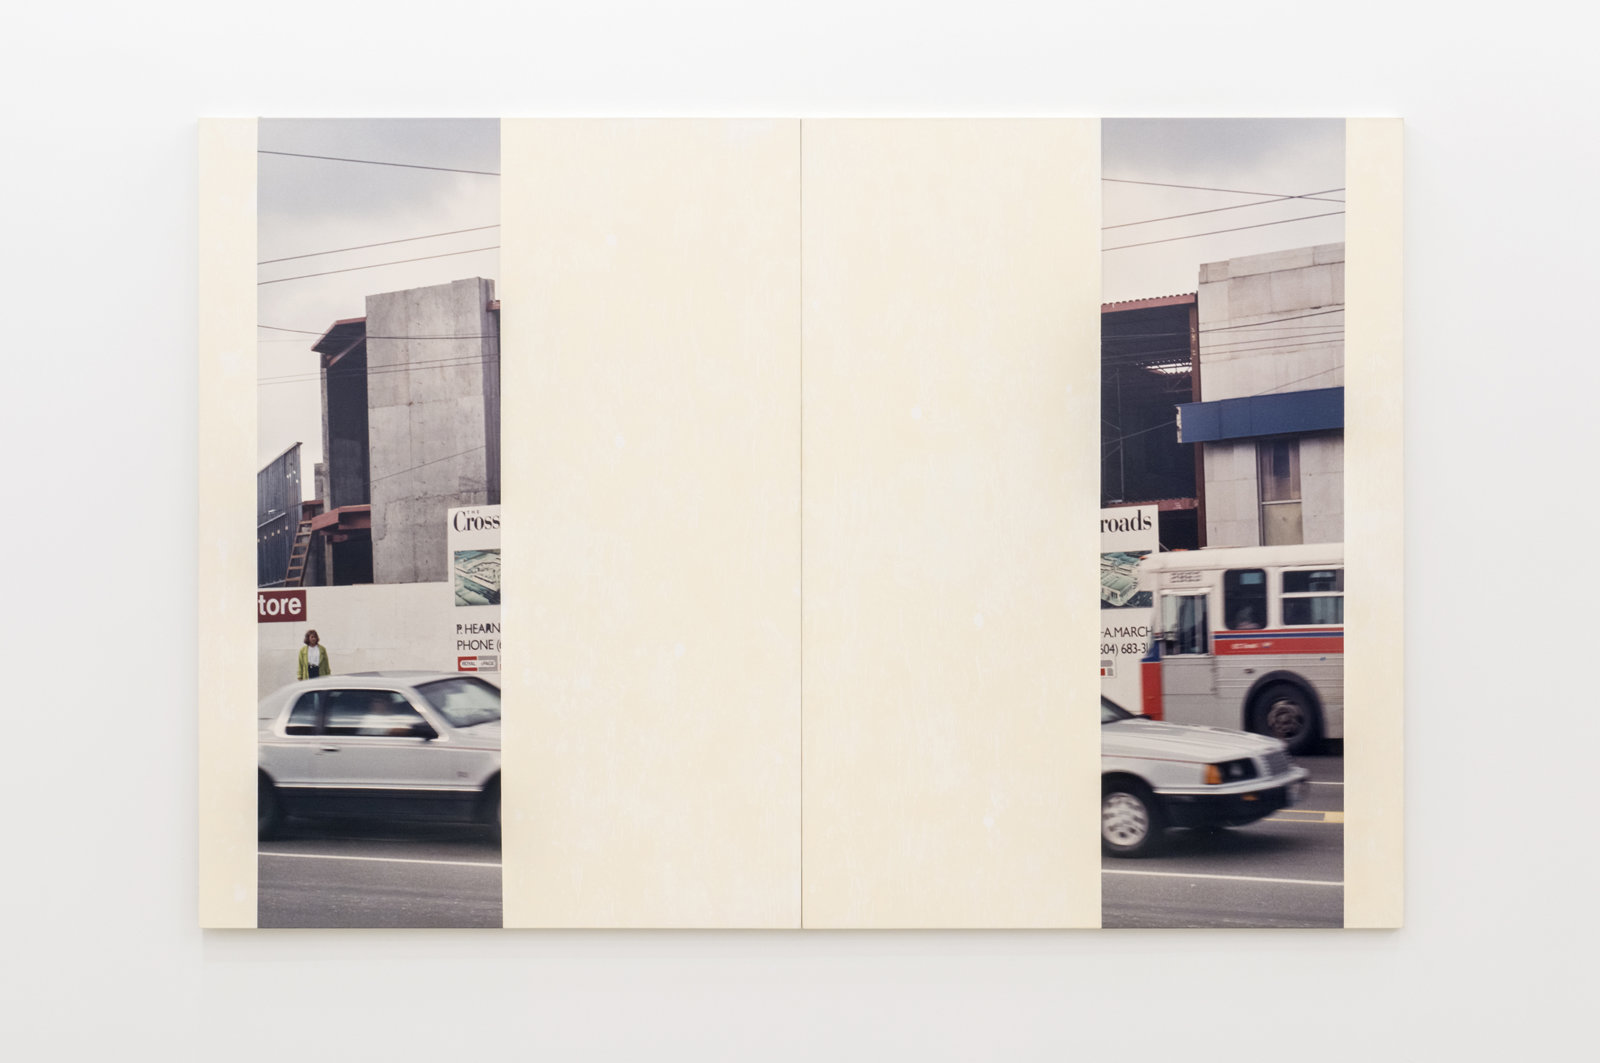 Ian Wallace, In the Street (Cologne Series IV), 1989, diptych, photolaminate with acrylic and monoprint on canvas, 80 x 120 in. (203 x 305 cm)